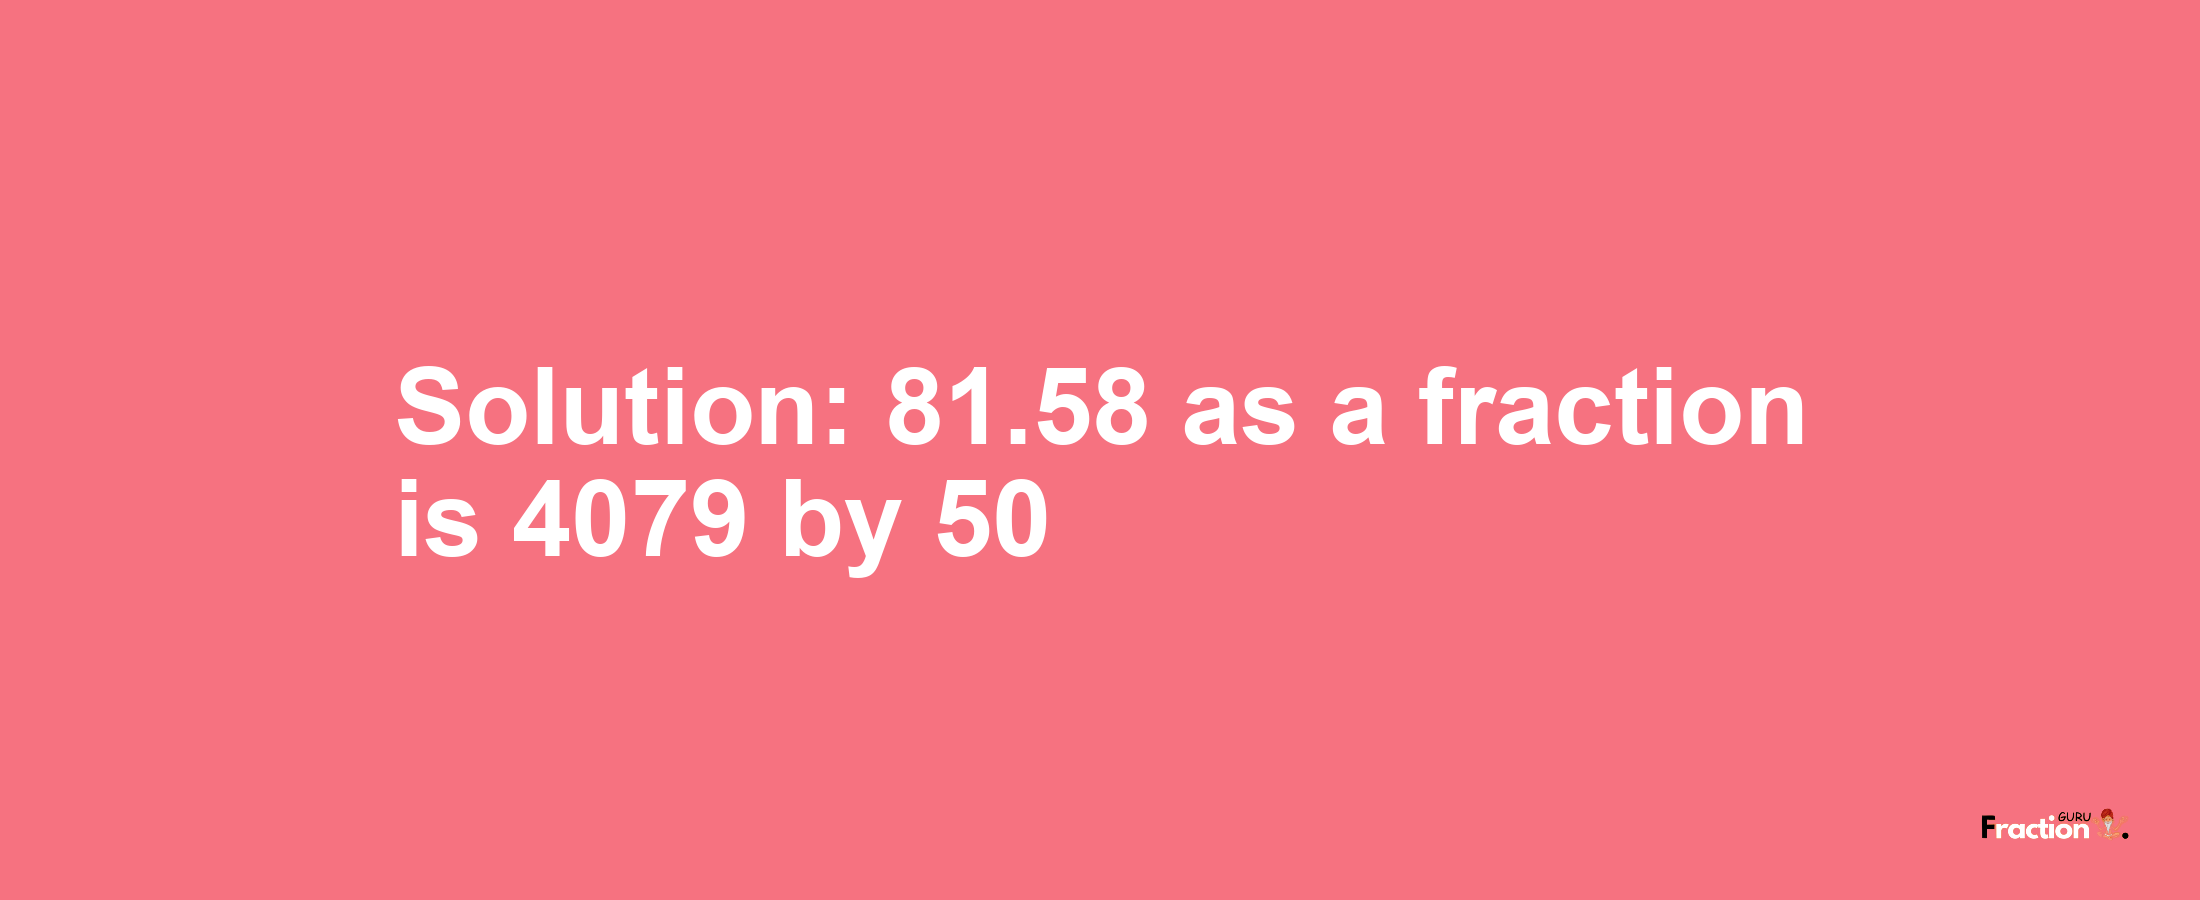 Solution:81.58 as a fraction is 4079/50